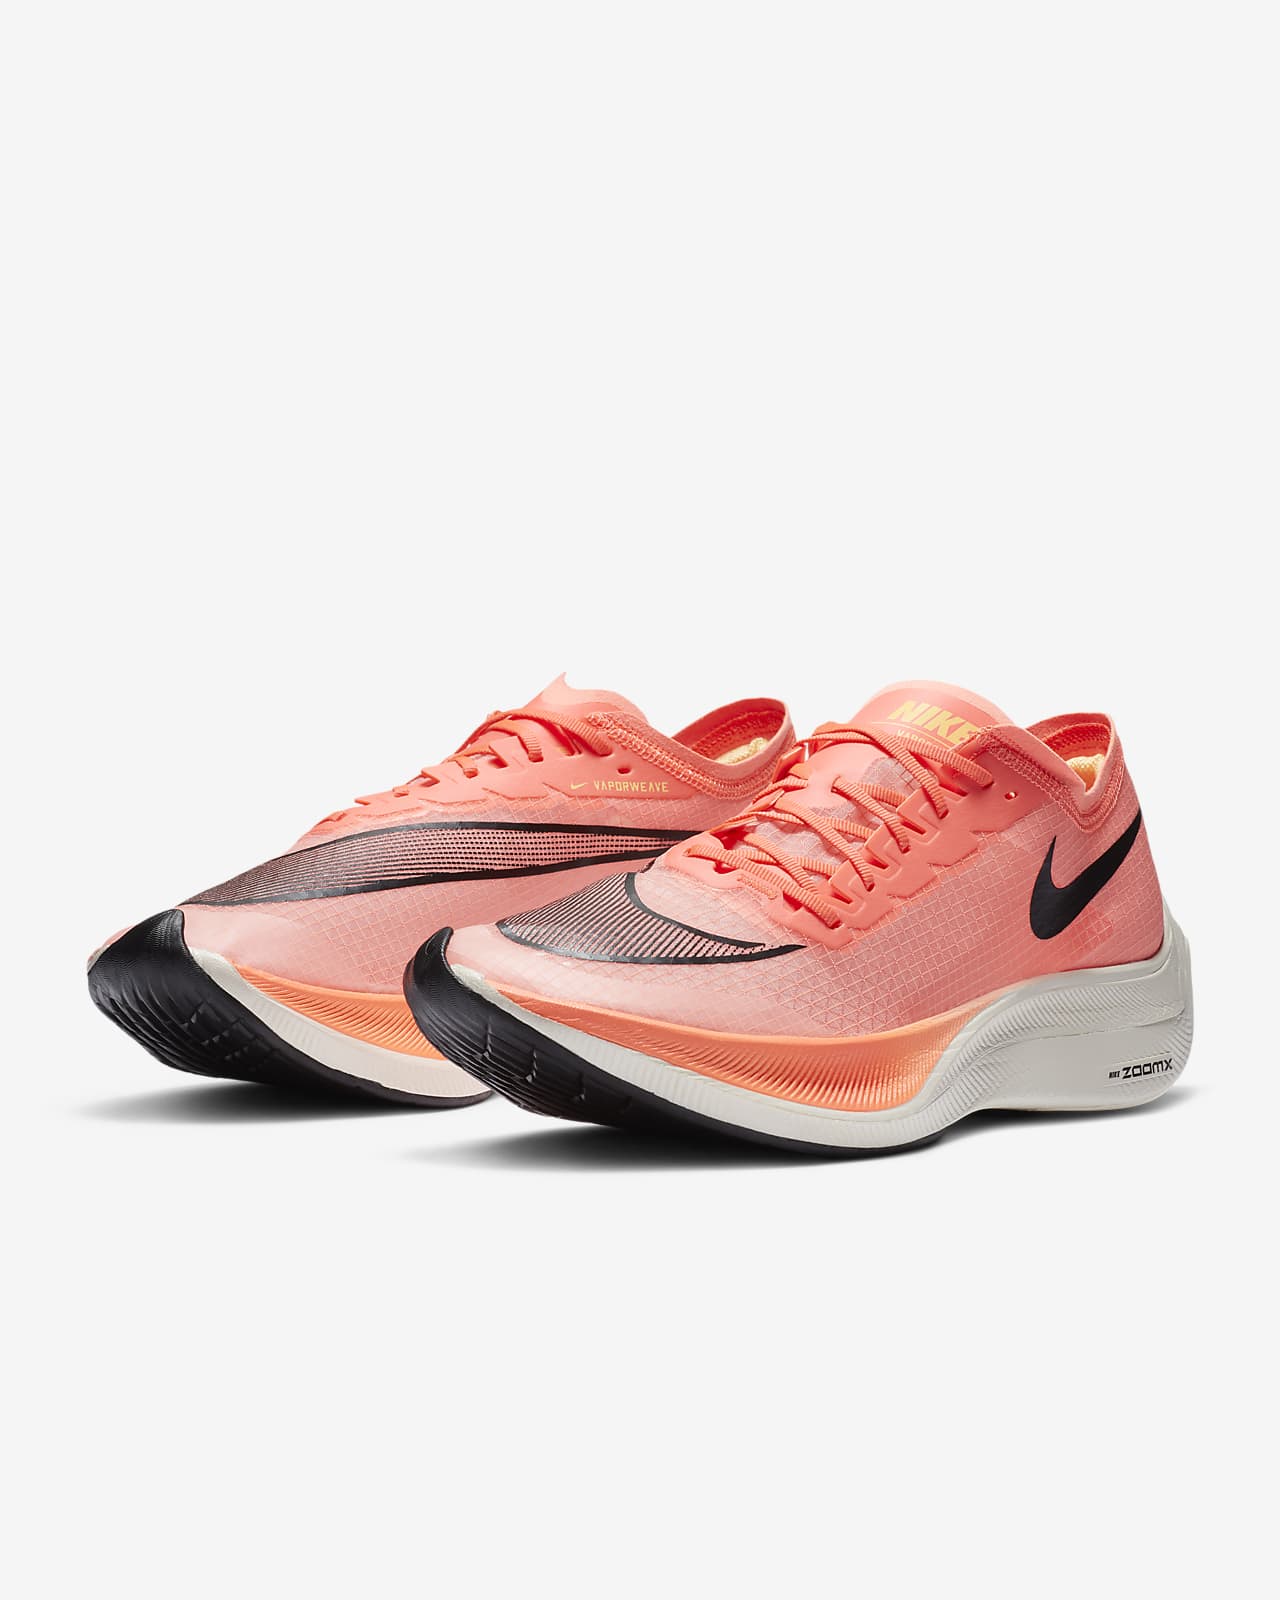 vaporfly sold out